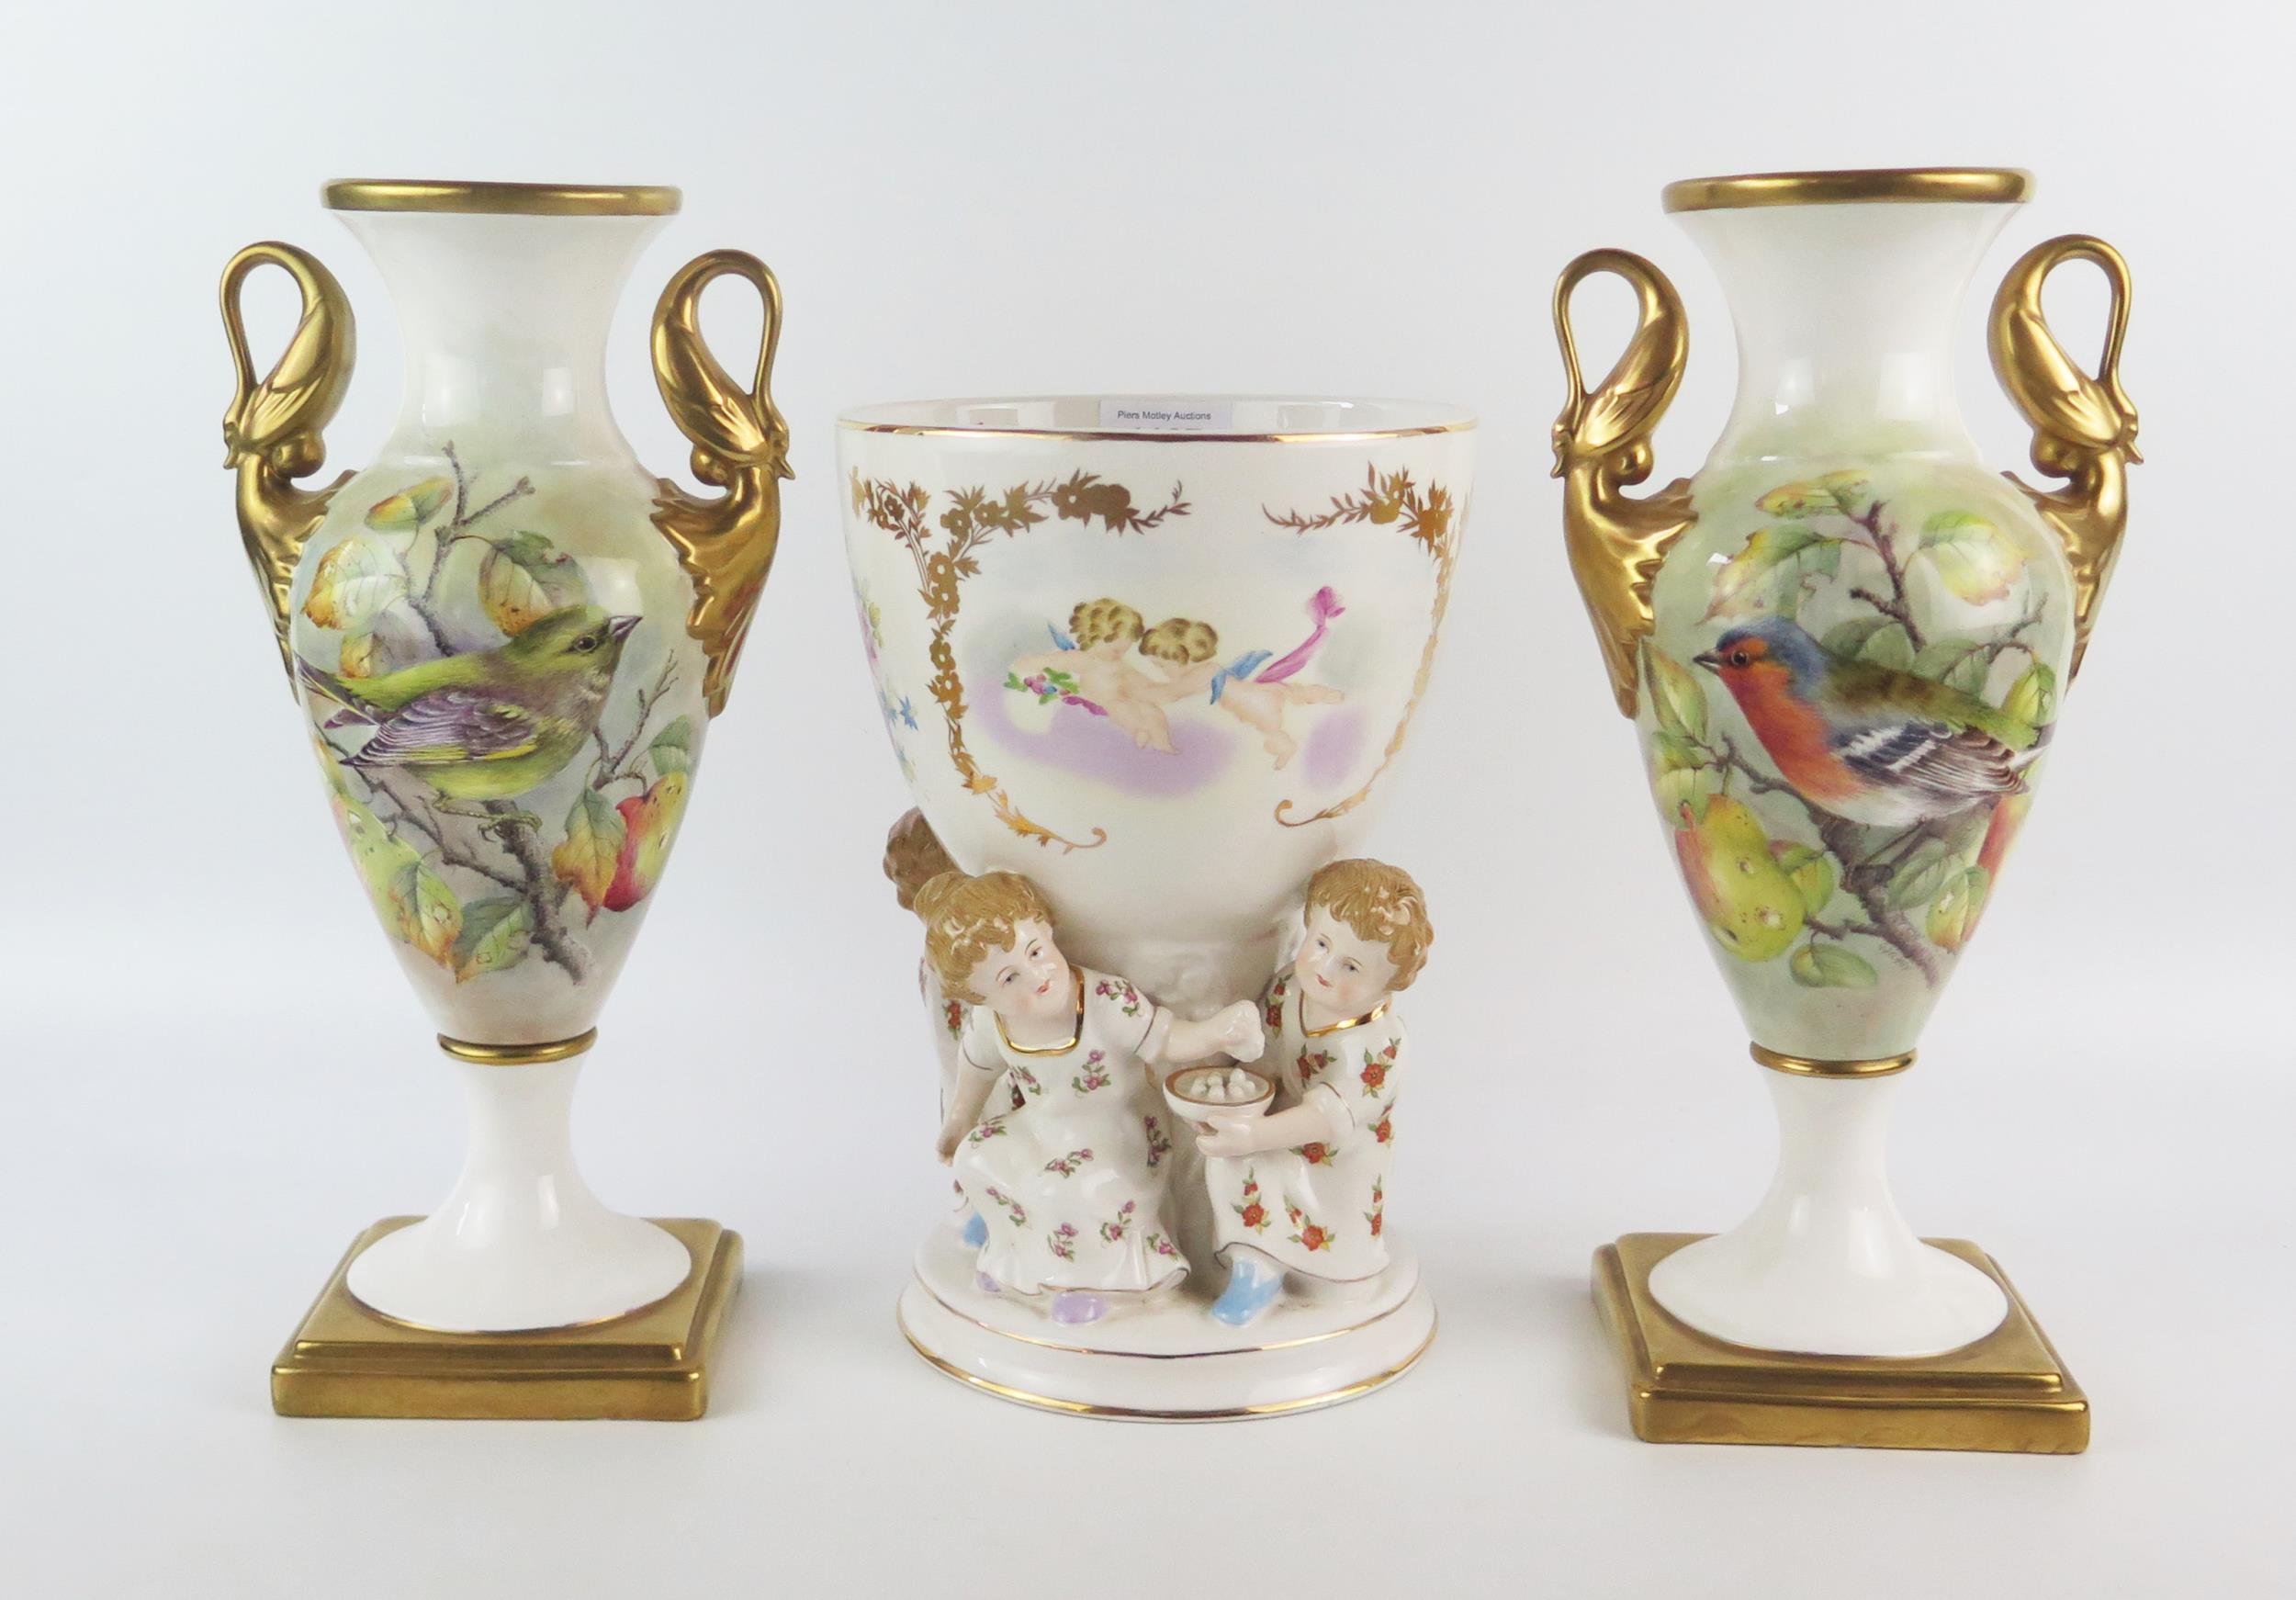 A pair of G Delaney porcelain twin handled vases, of ovoid form, the gilded handles modelled as